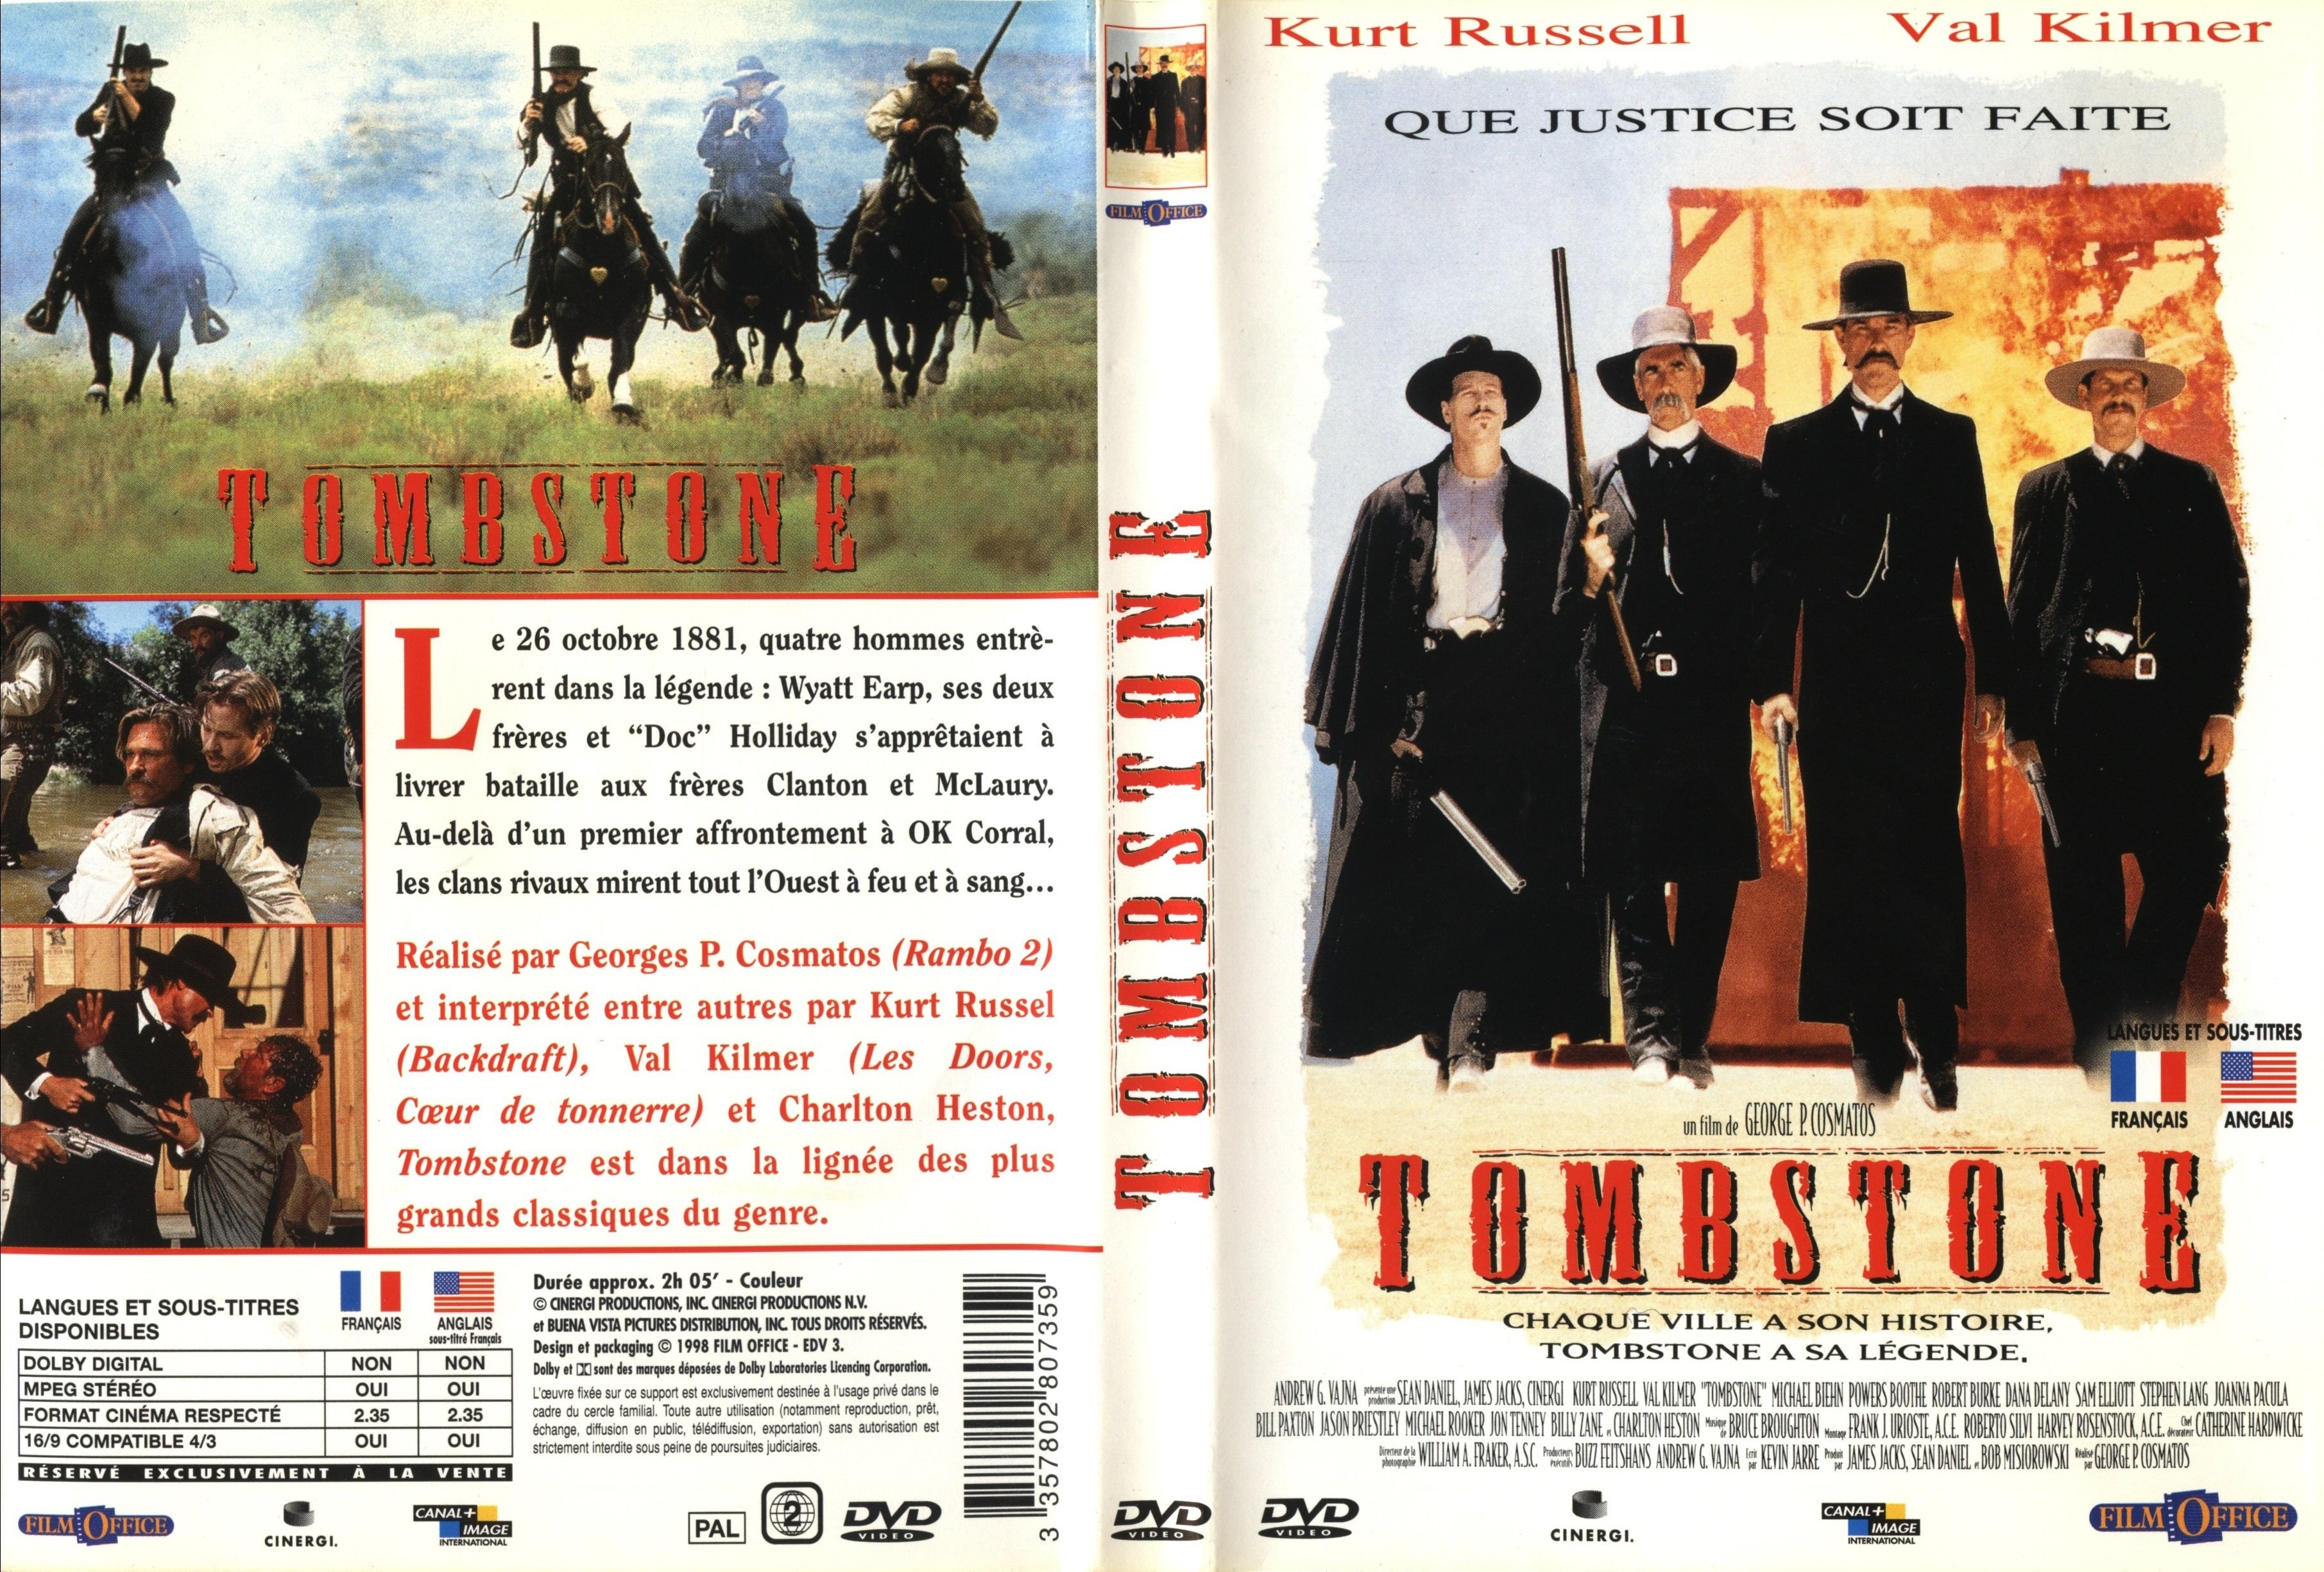 Jaquette DVD Tombstone